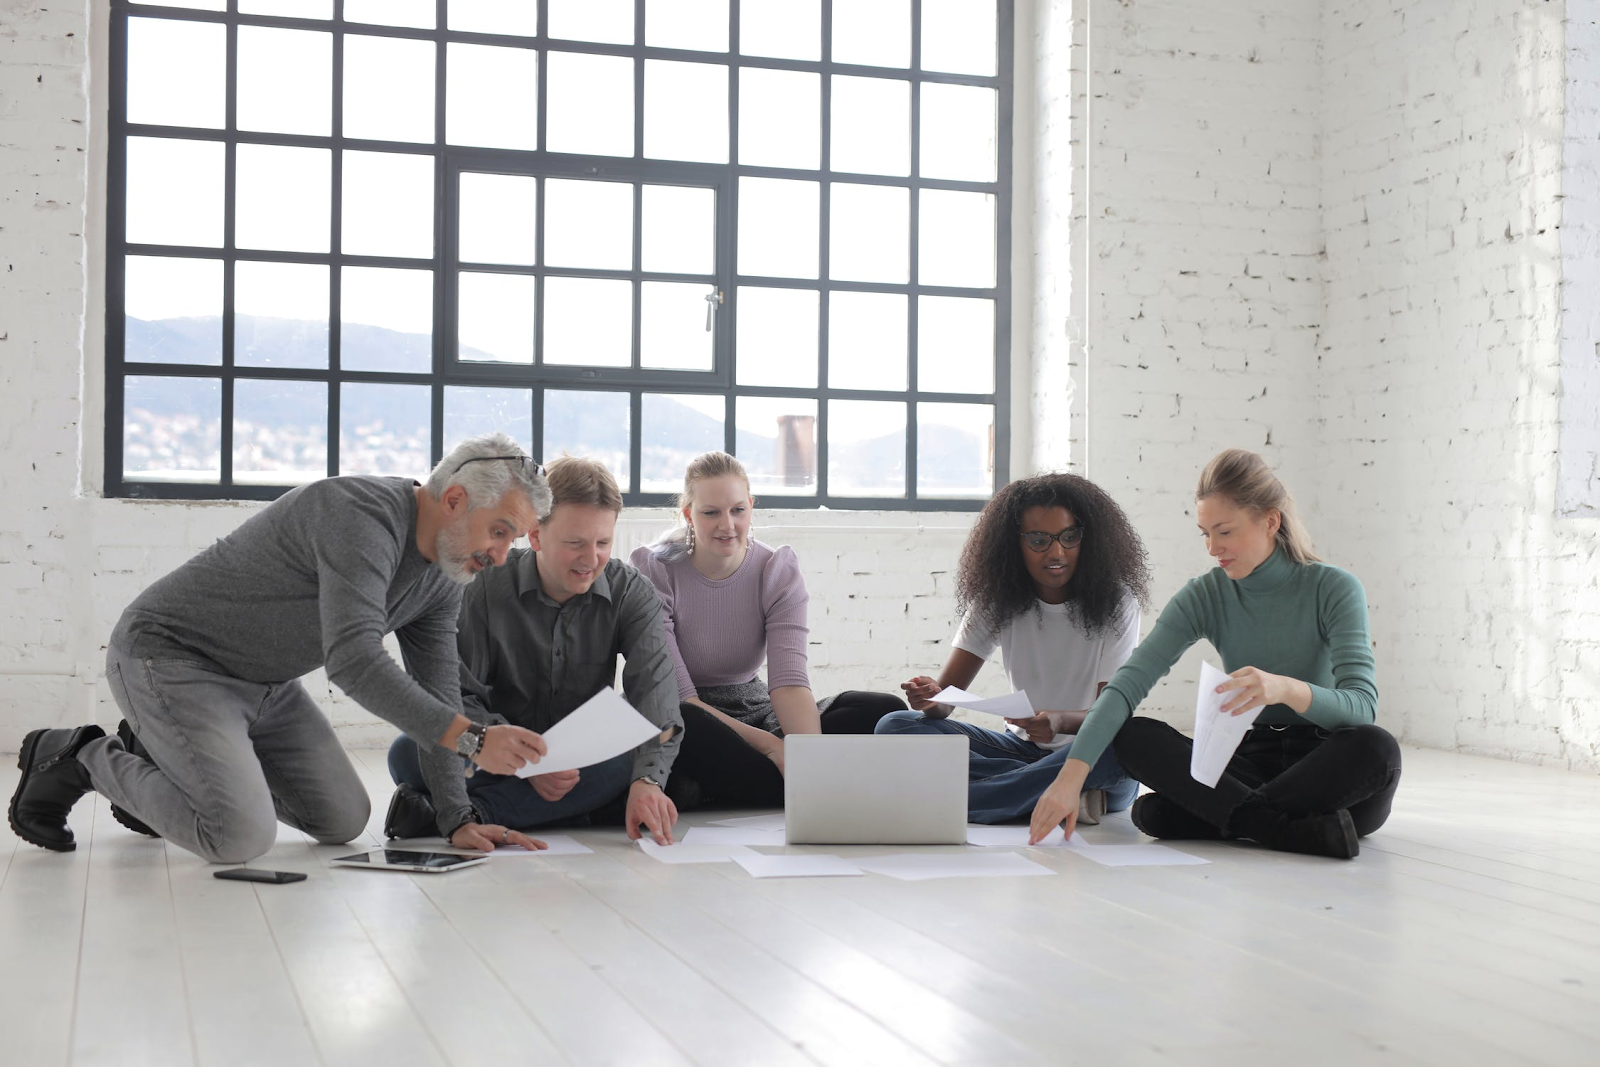 Bunch of people sitting on a white wooden floor, possibly discussing a project